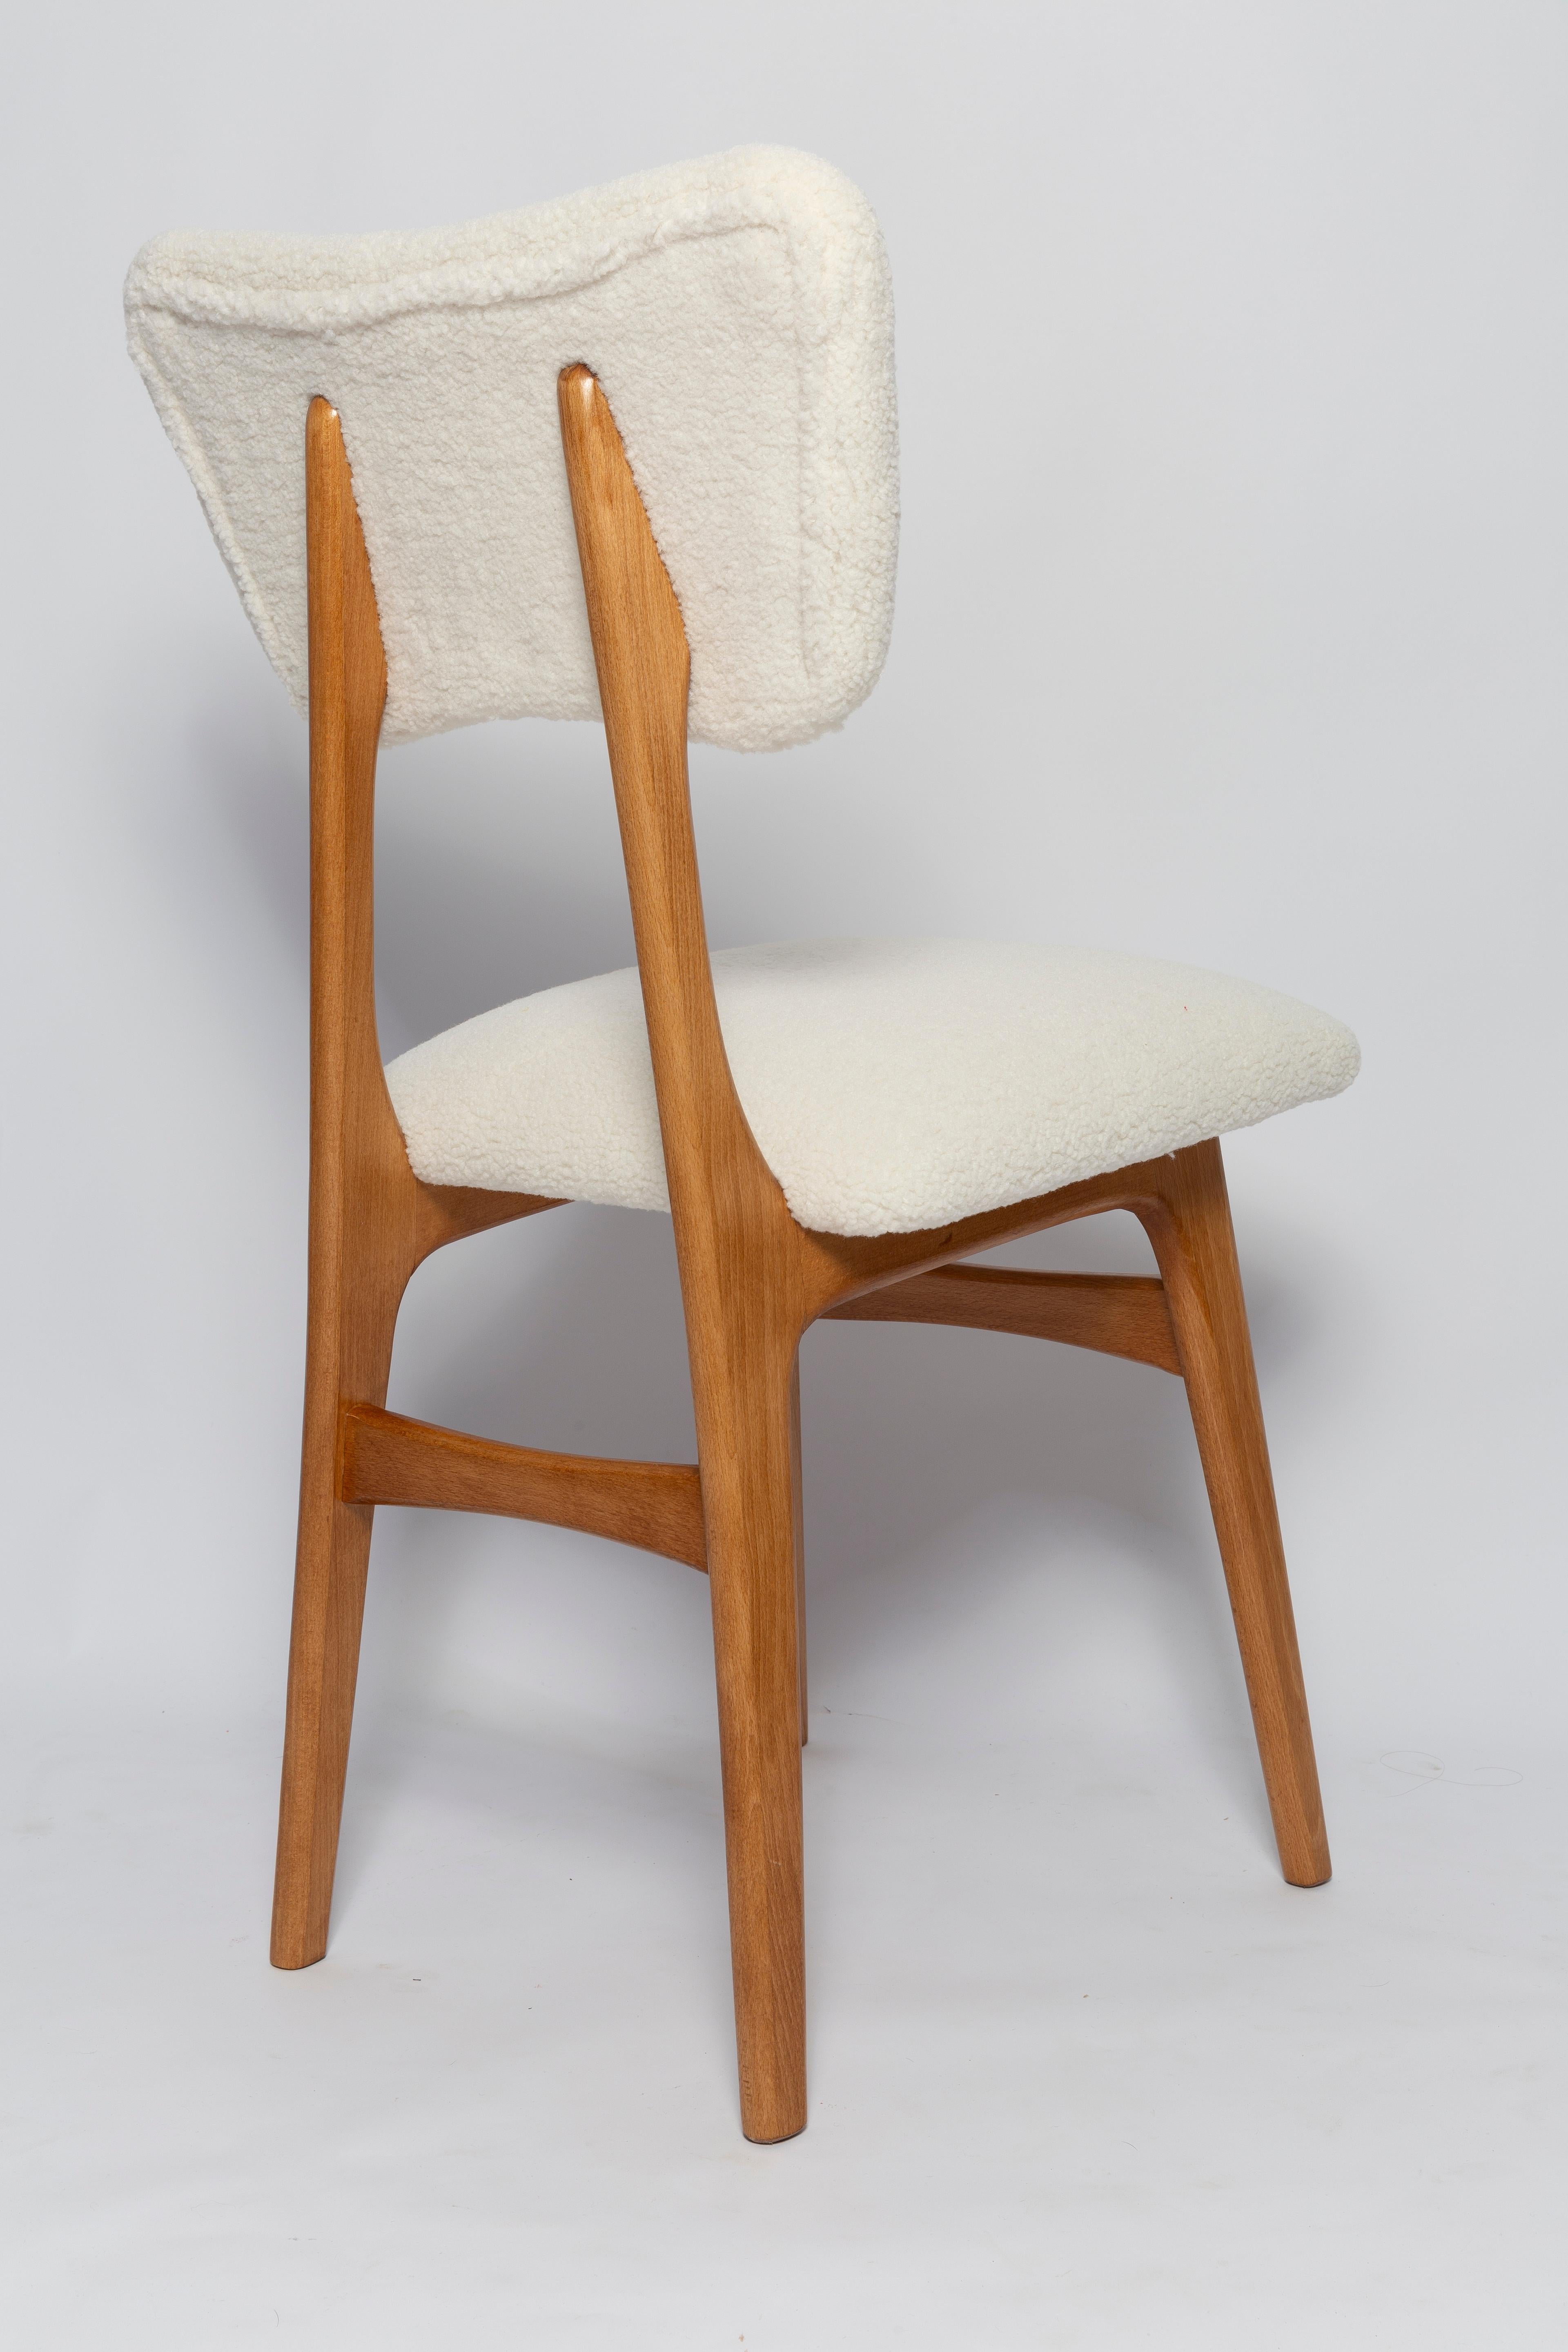 Hand-Crafted Mid Century Butterfly Chair, Light Ivory Boucle, Light Oak Wood, Europe, 1960s For Sale